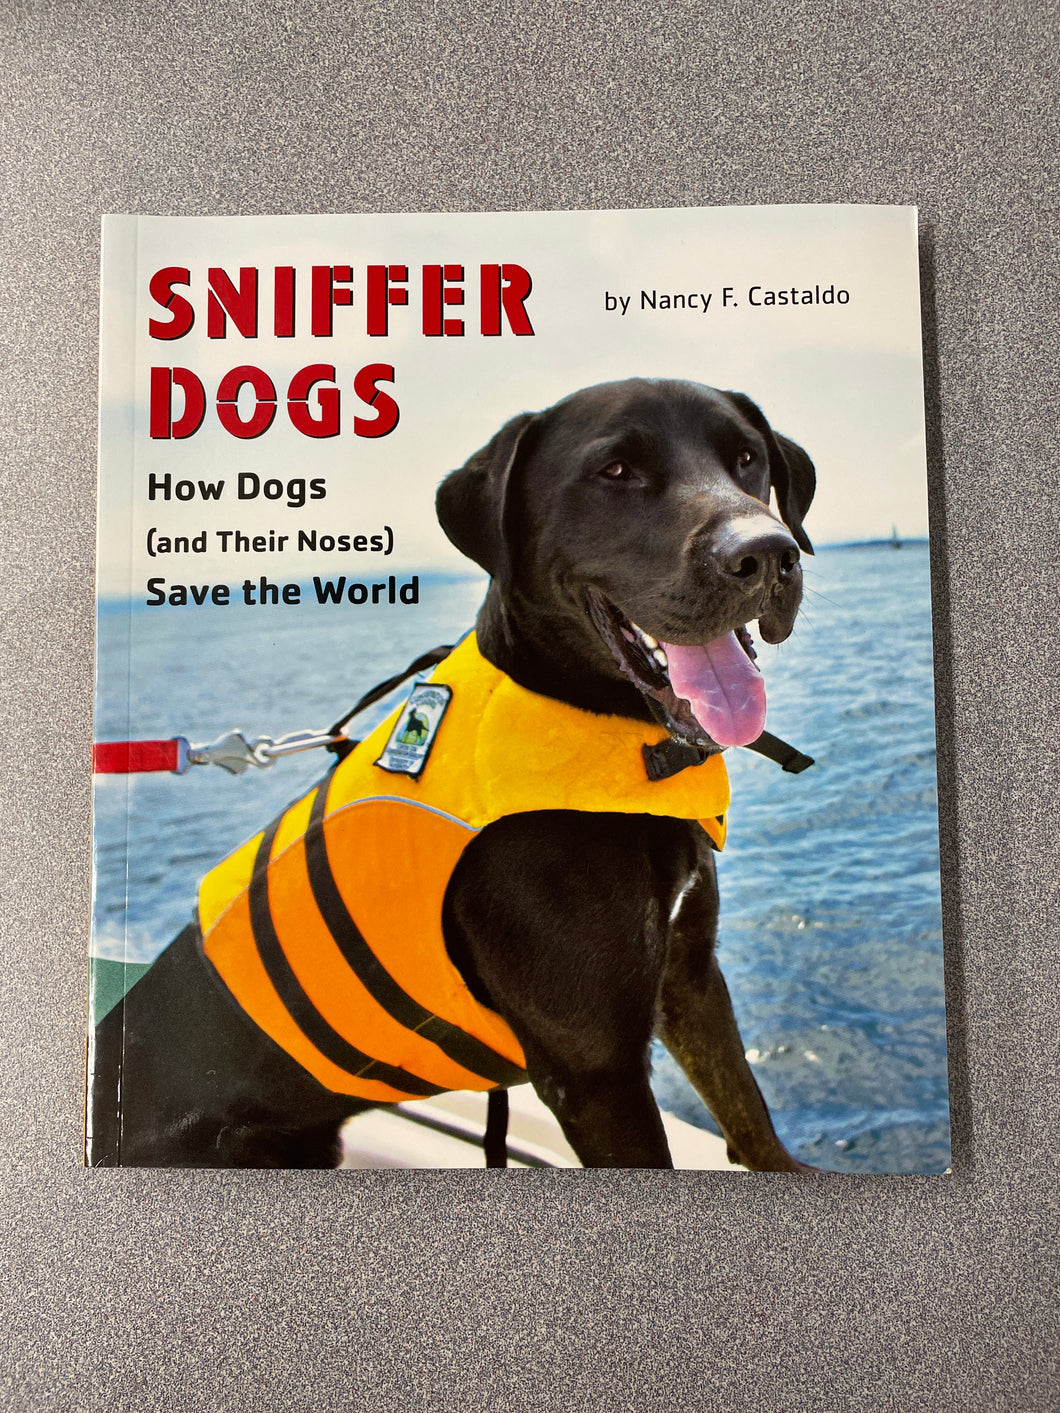 Sniffer Dogs: How Dogs (and Their Noses) Save the World, Castaldo, Nancy F. [2014] CN 2/24